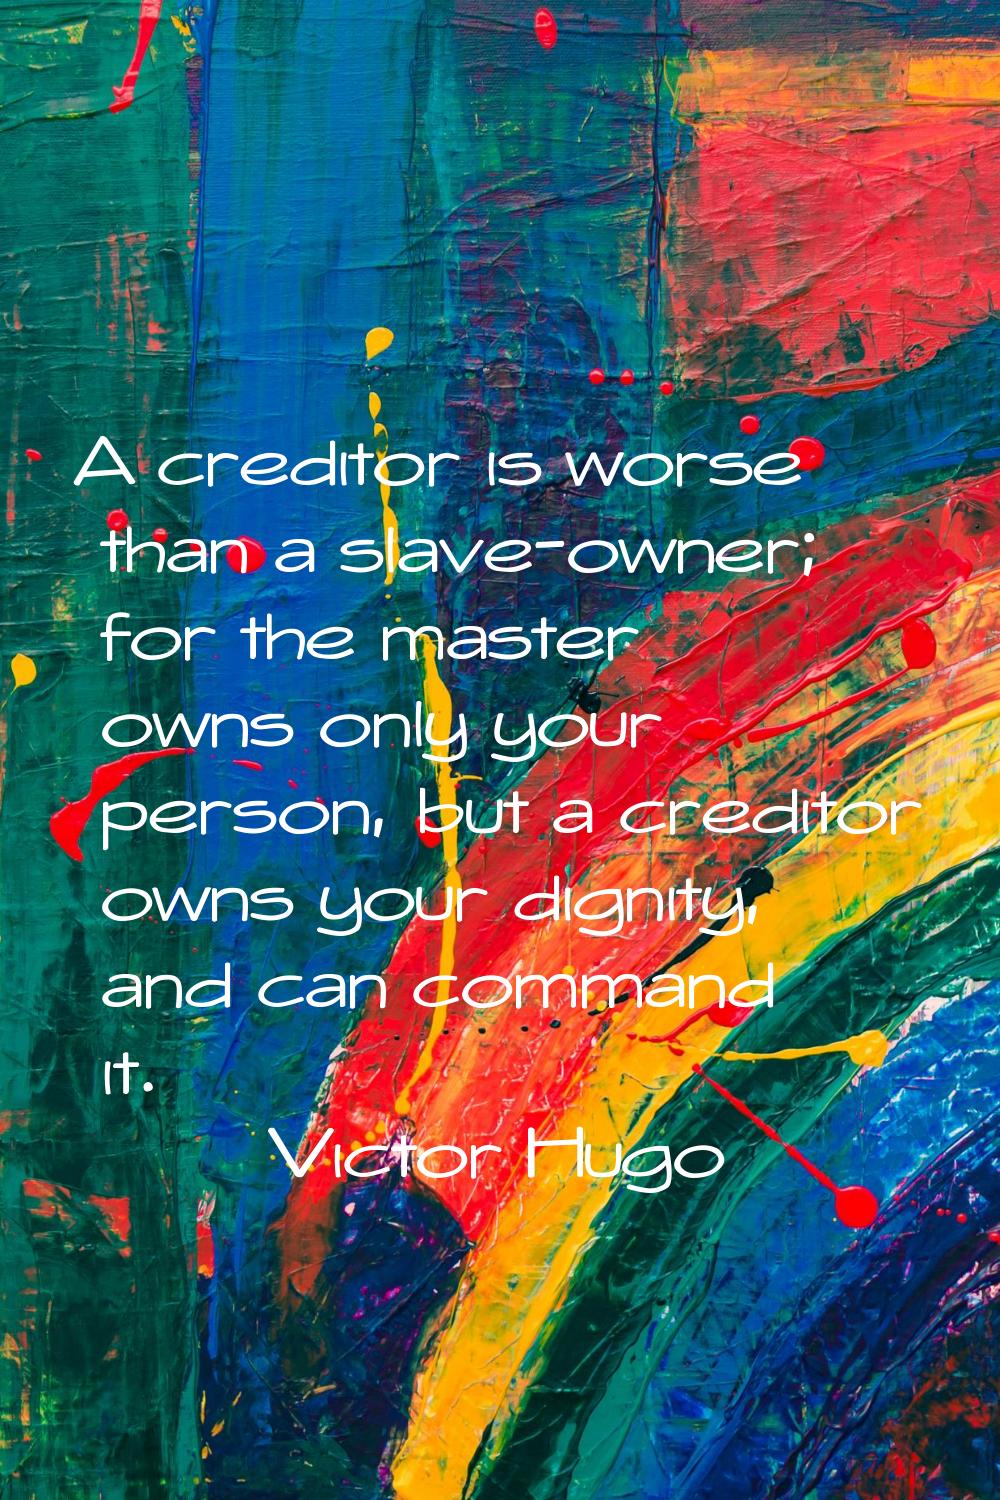 A creditor is worse than a slave-owner; for the master owns only your person, but a creditor owns y